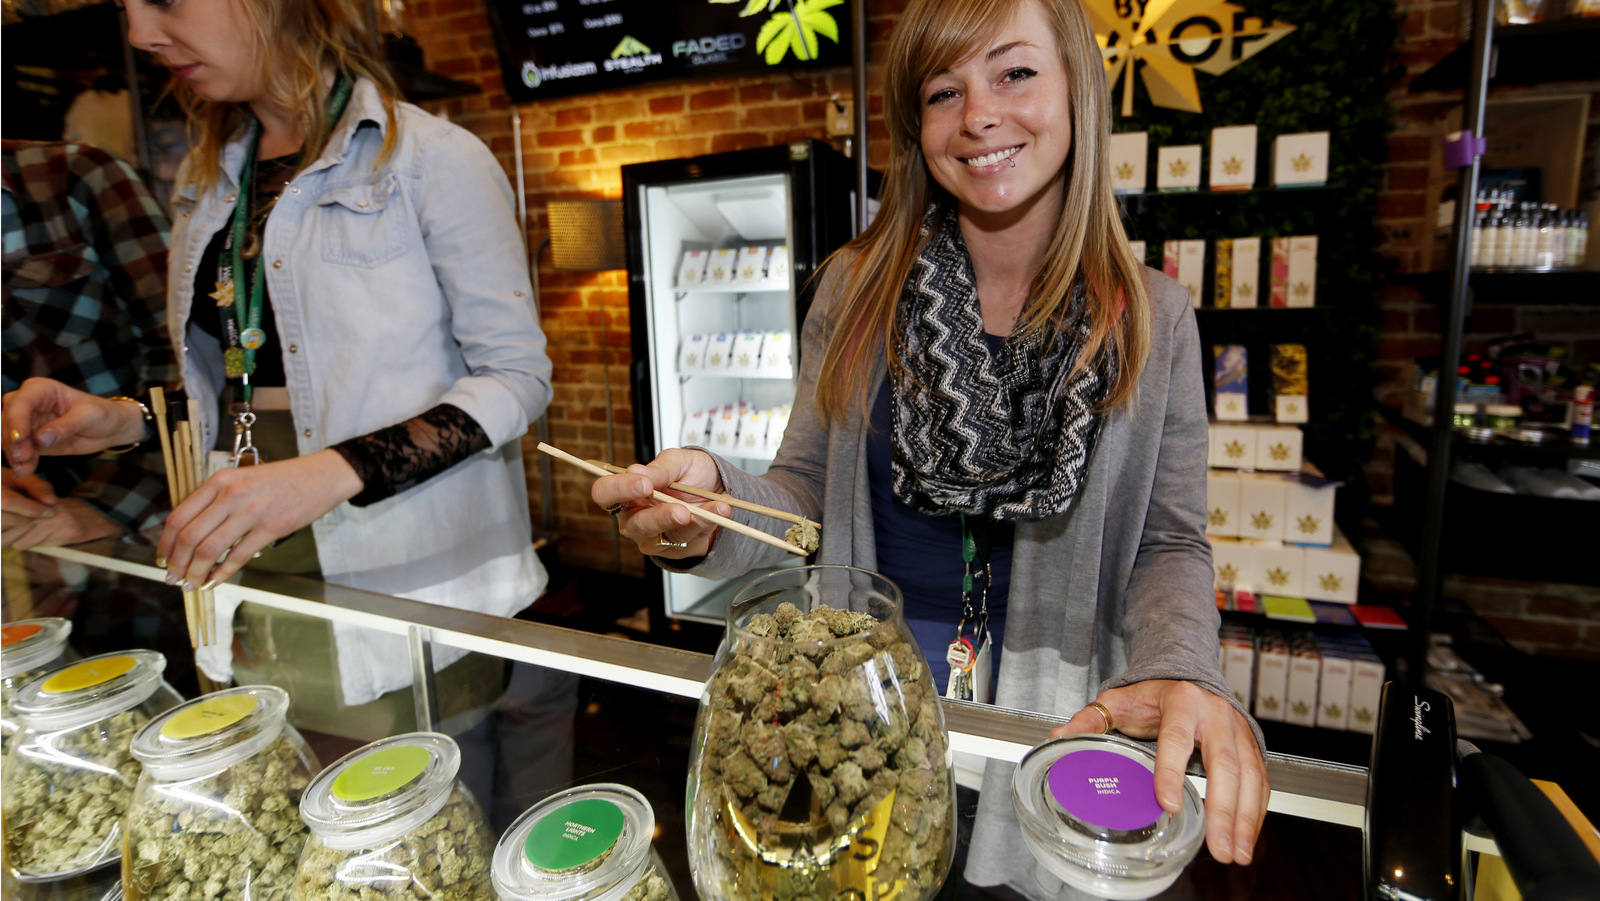 LivWell store manager Carlyssa Scanlon shows off some of the products available in the marijuana line marketed by rapper Snoop Dogg in one of the marijuana chain's outlets south of downtown Denver. LivWell grows the Snoop pot alongside many other strains on its menu. (AP Photo/David Zalubowski)